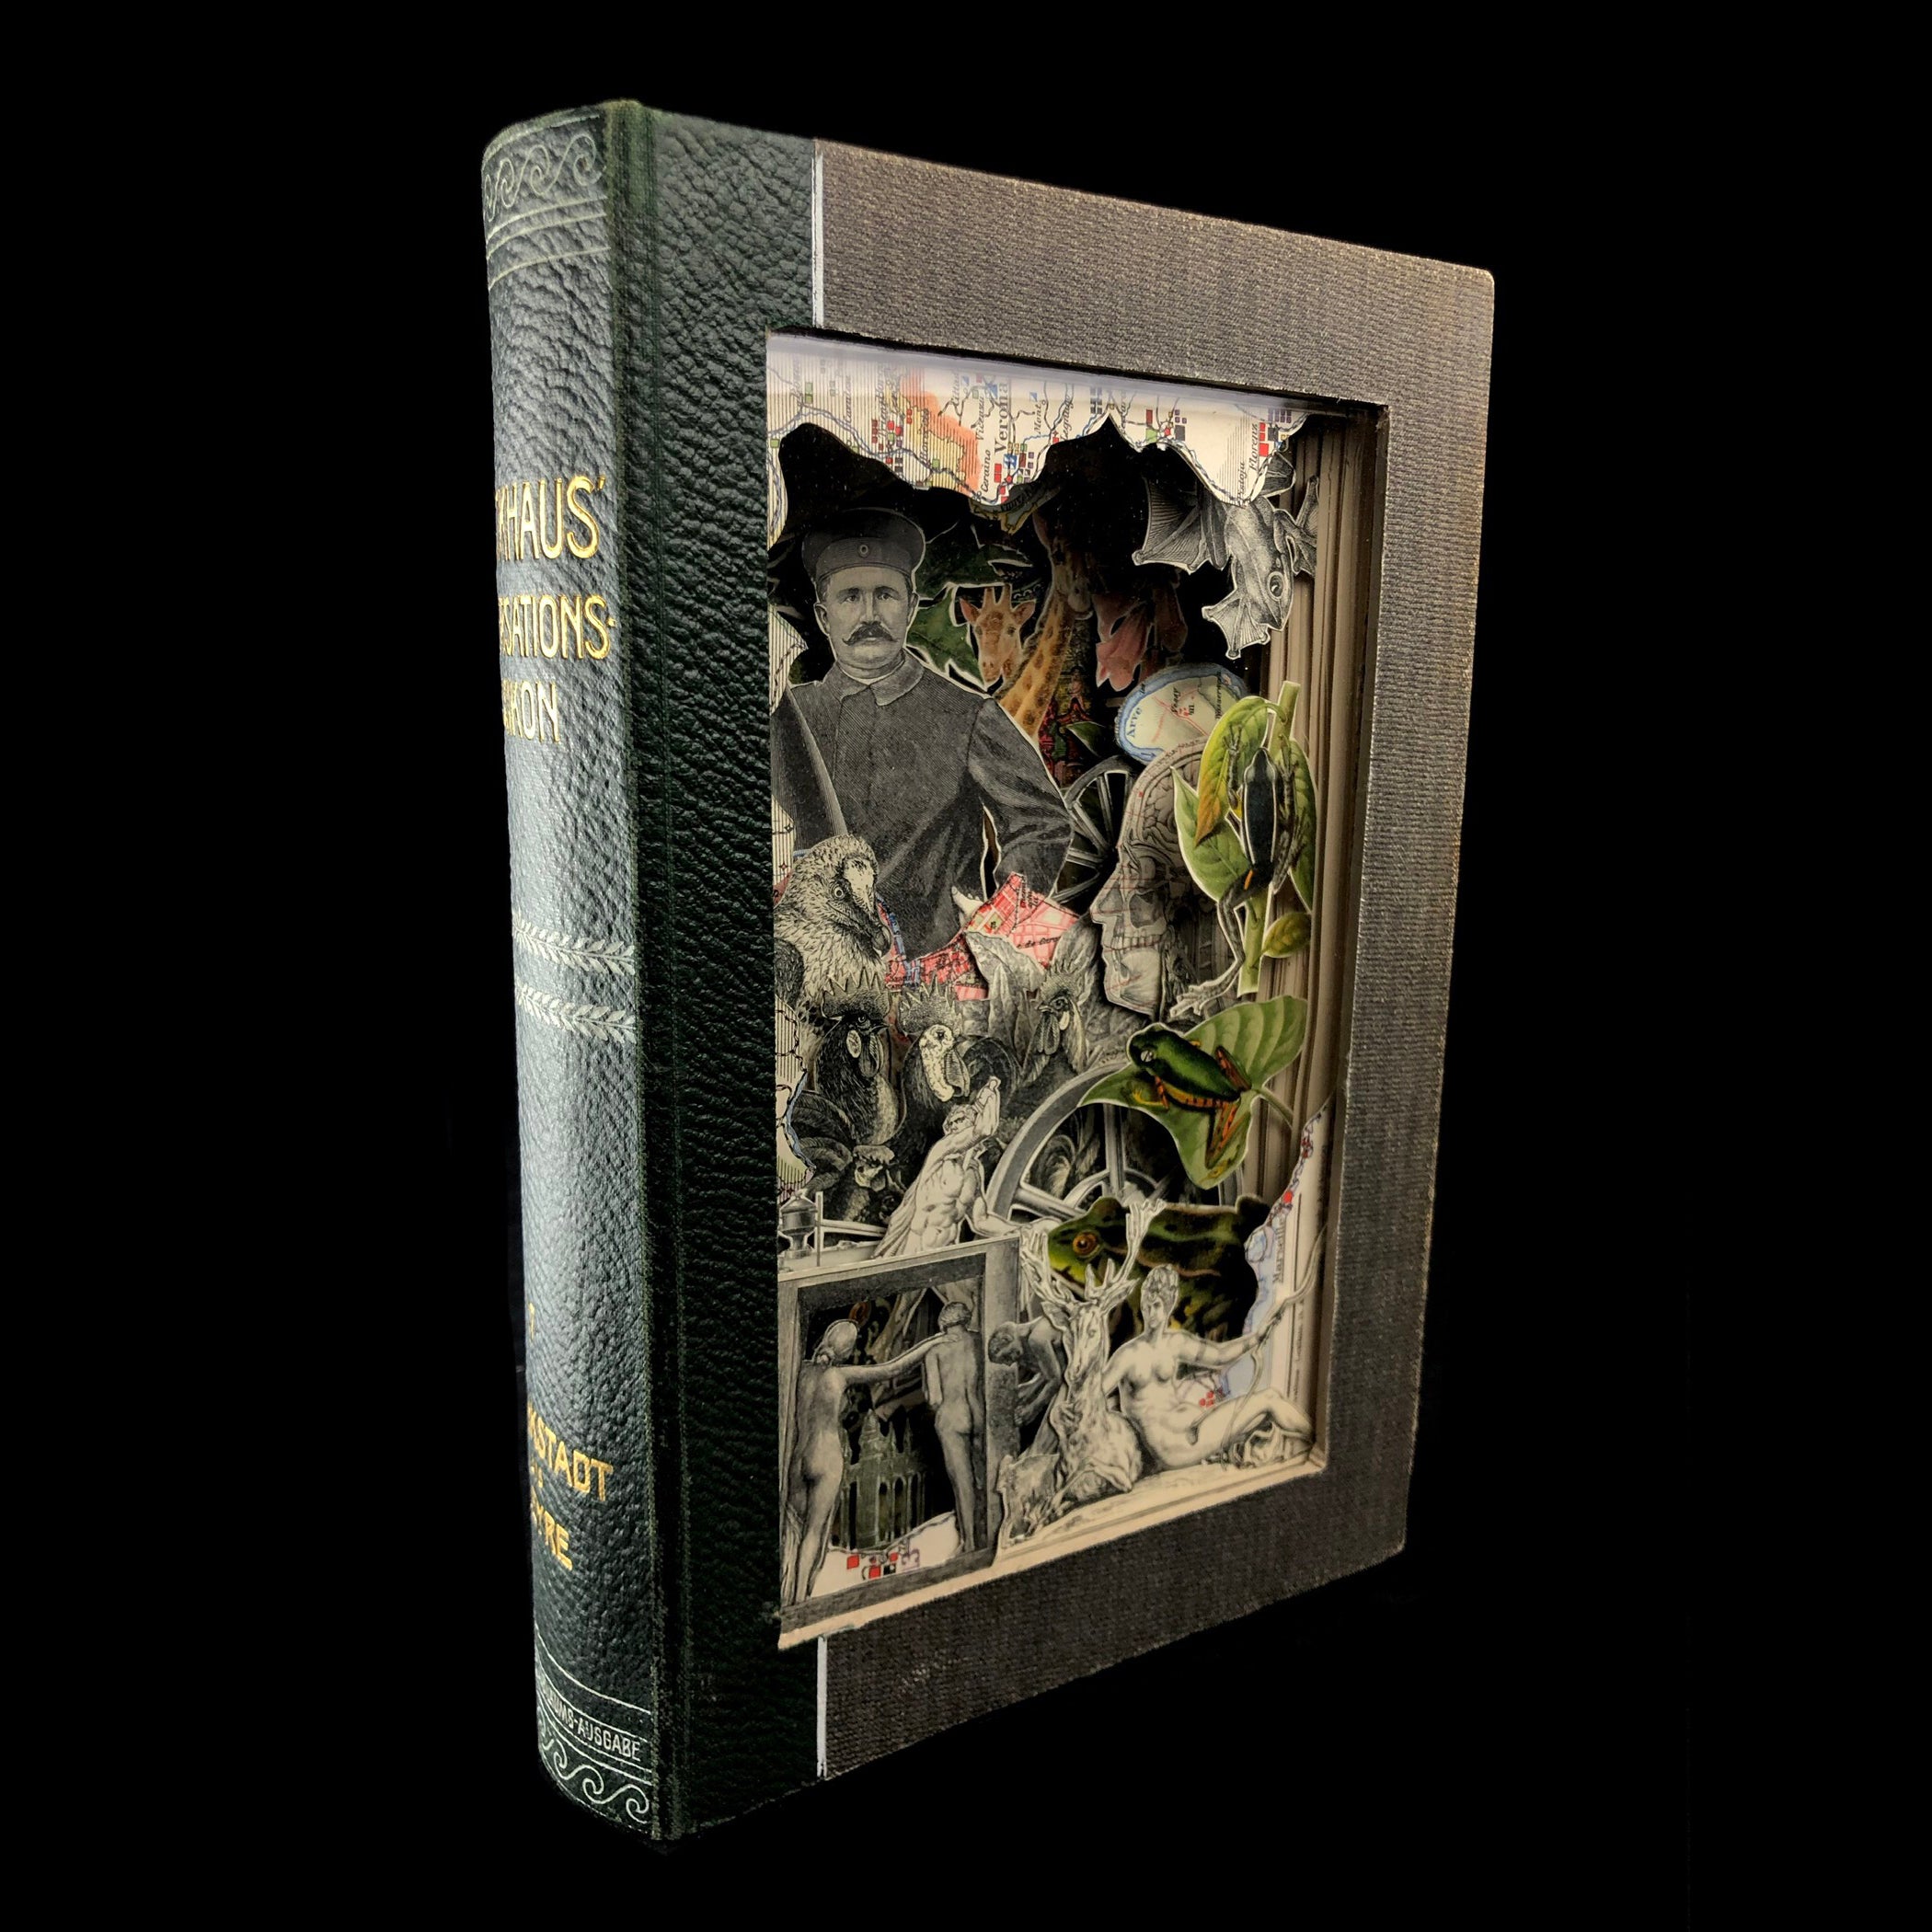 Side view of spine of book and front with clear window to art inside book